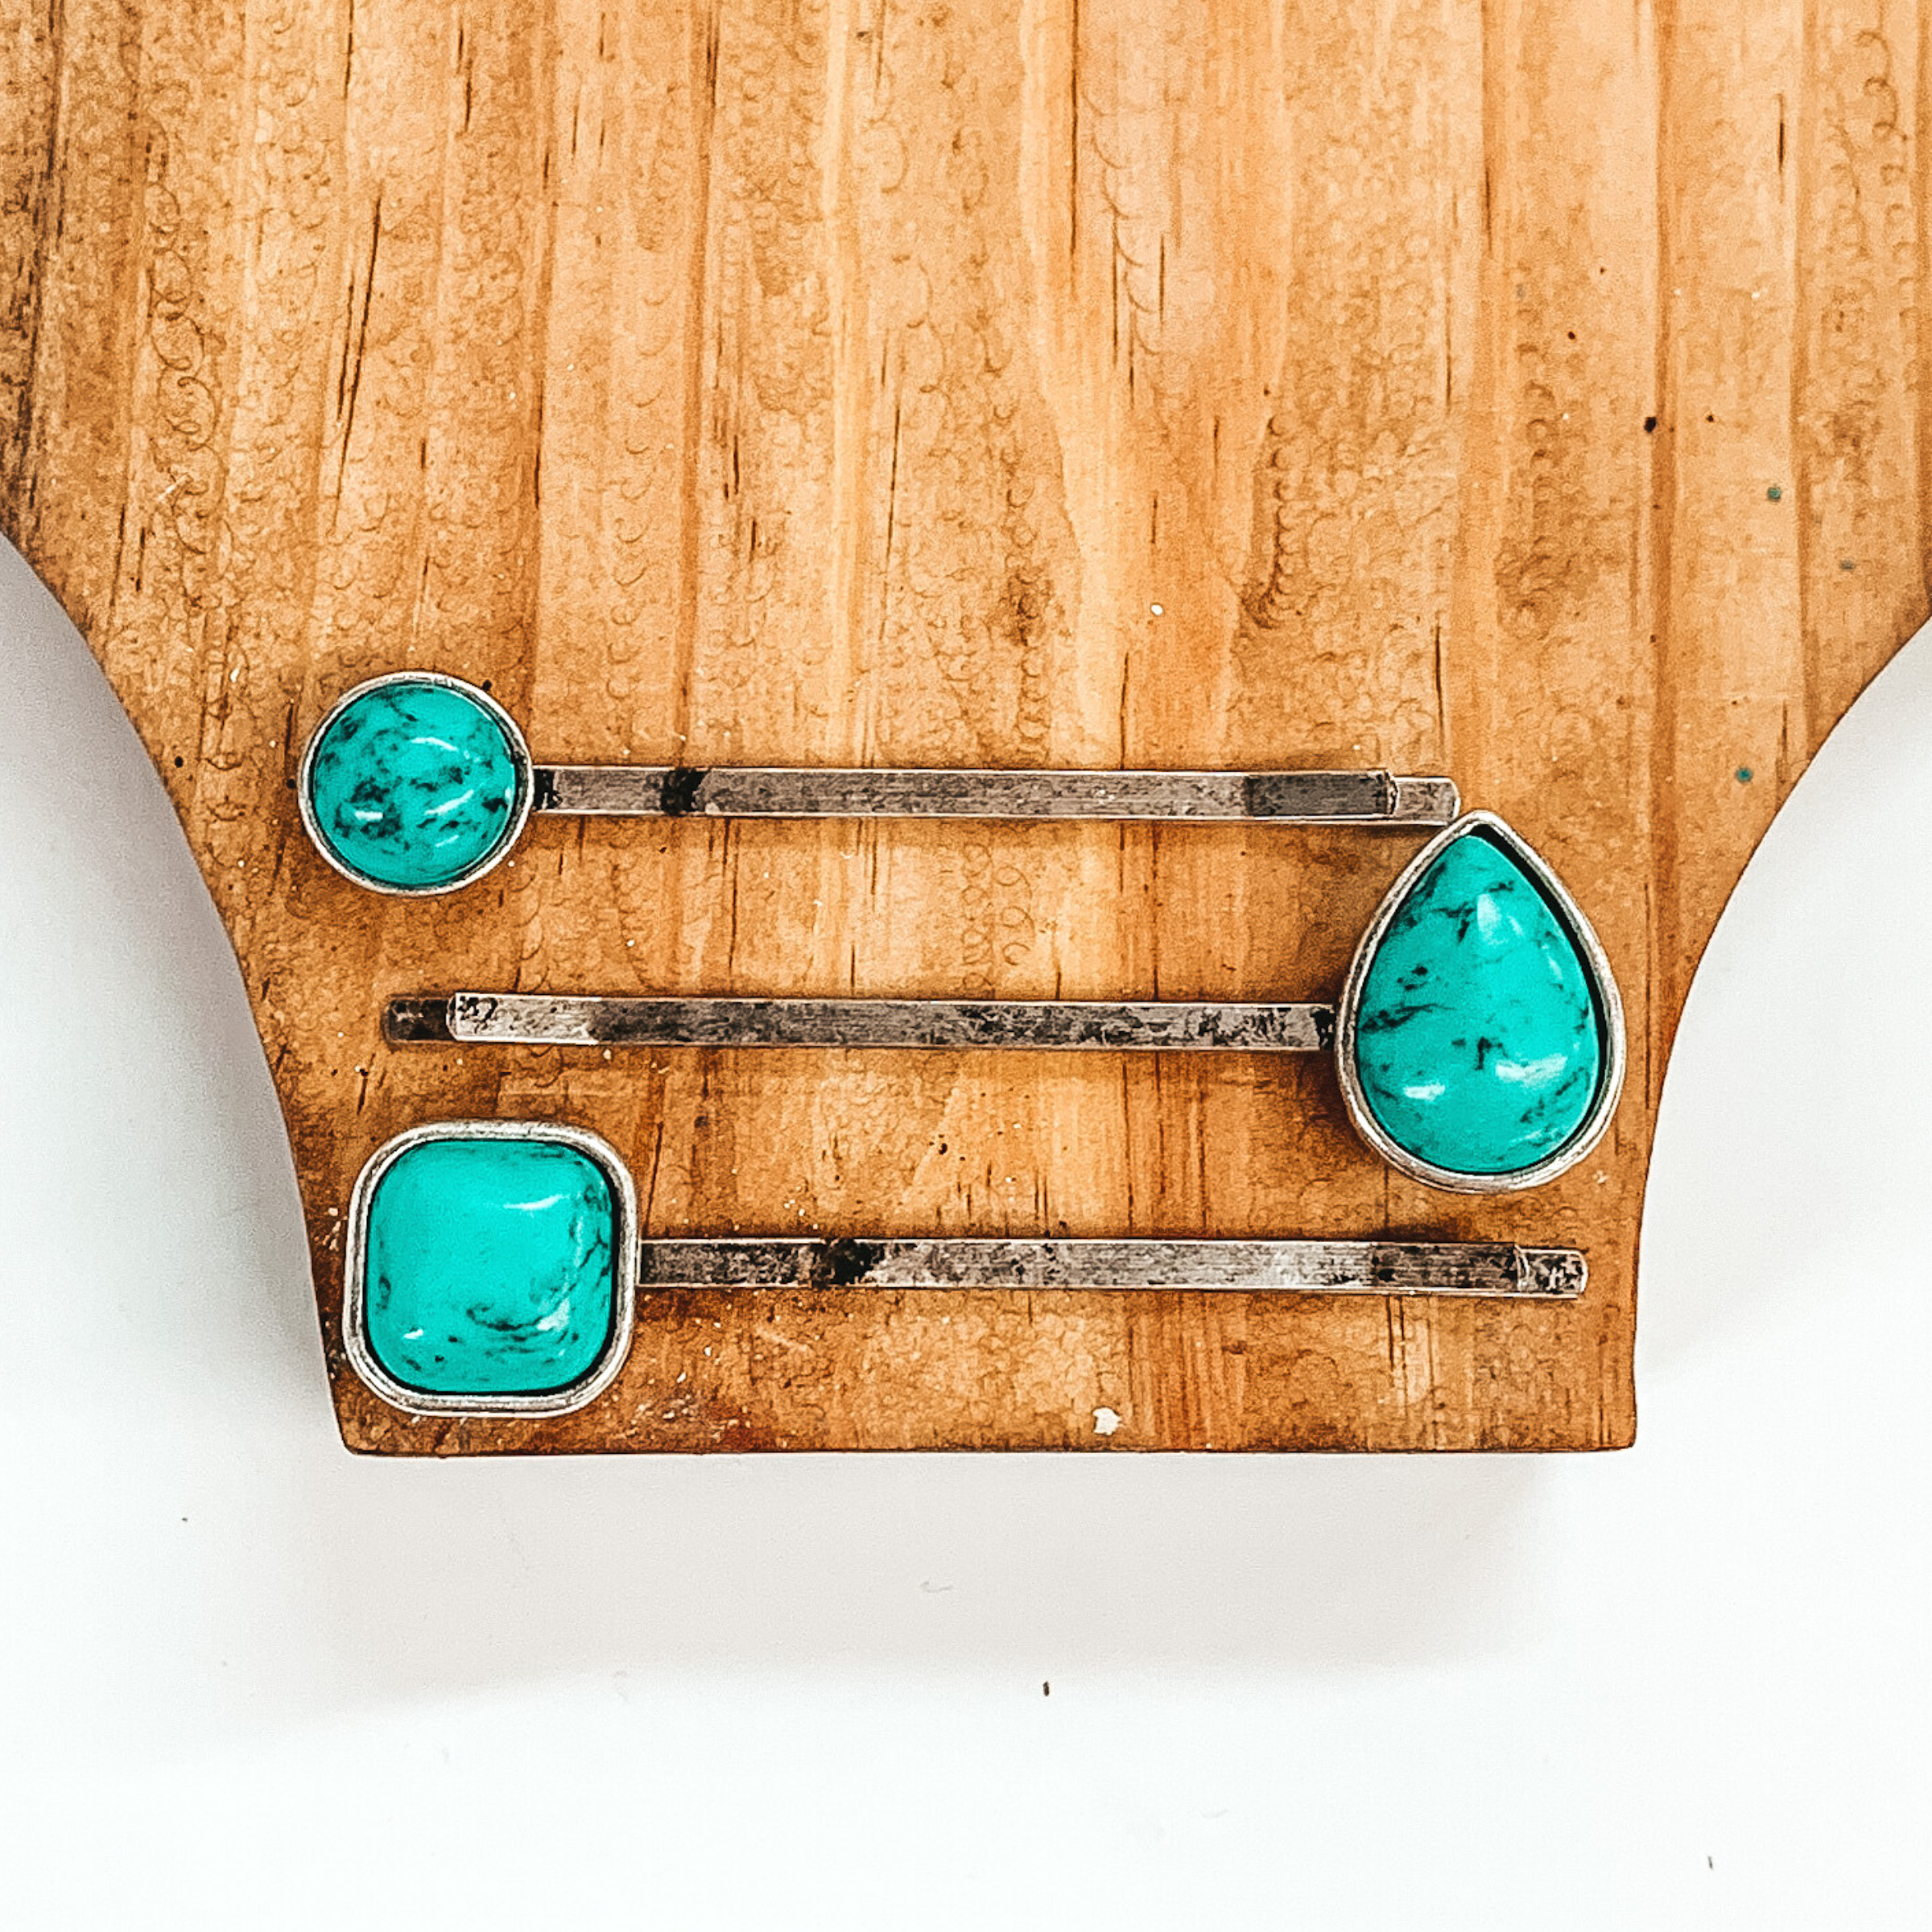 Set of three silver hair pins. Each hair pin has a single turquoise stone in a different shape. These shapes include a circle, teardrop, and a square. These hair pins are pictured on a brown block on a white background. 